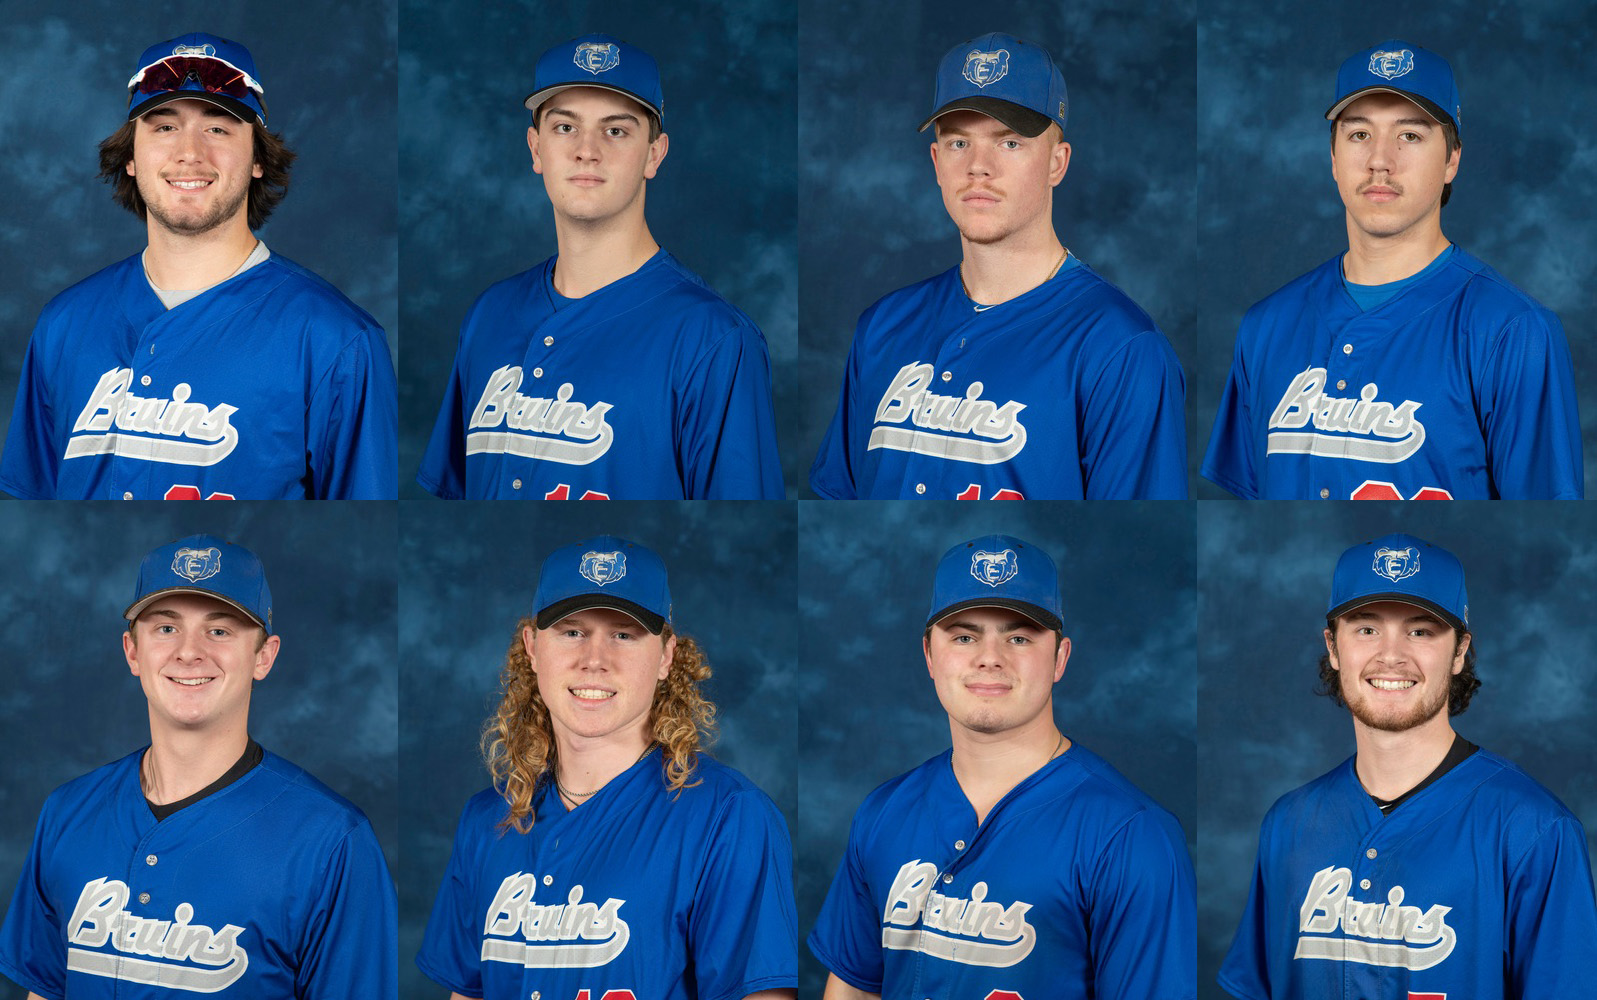 A collage of headshots of the baseball player award winners.